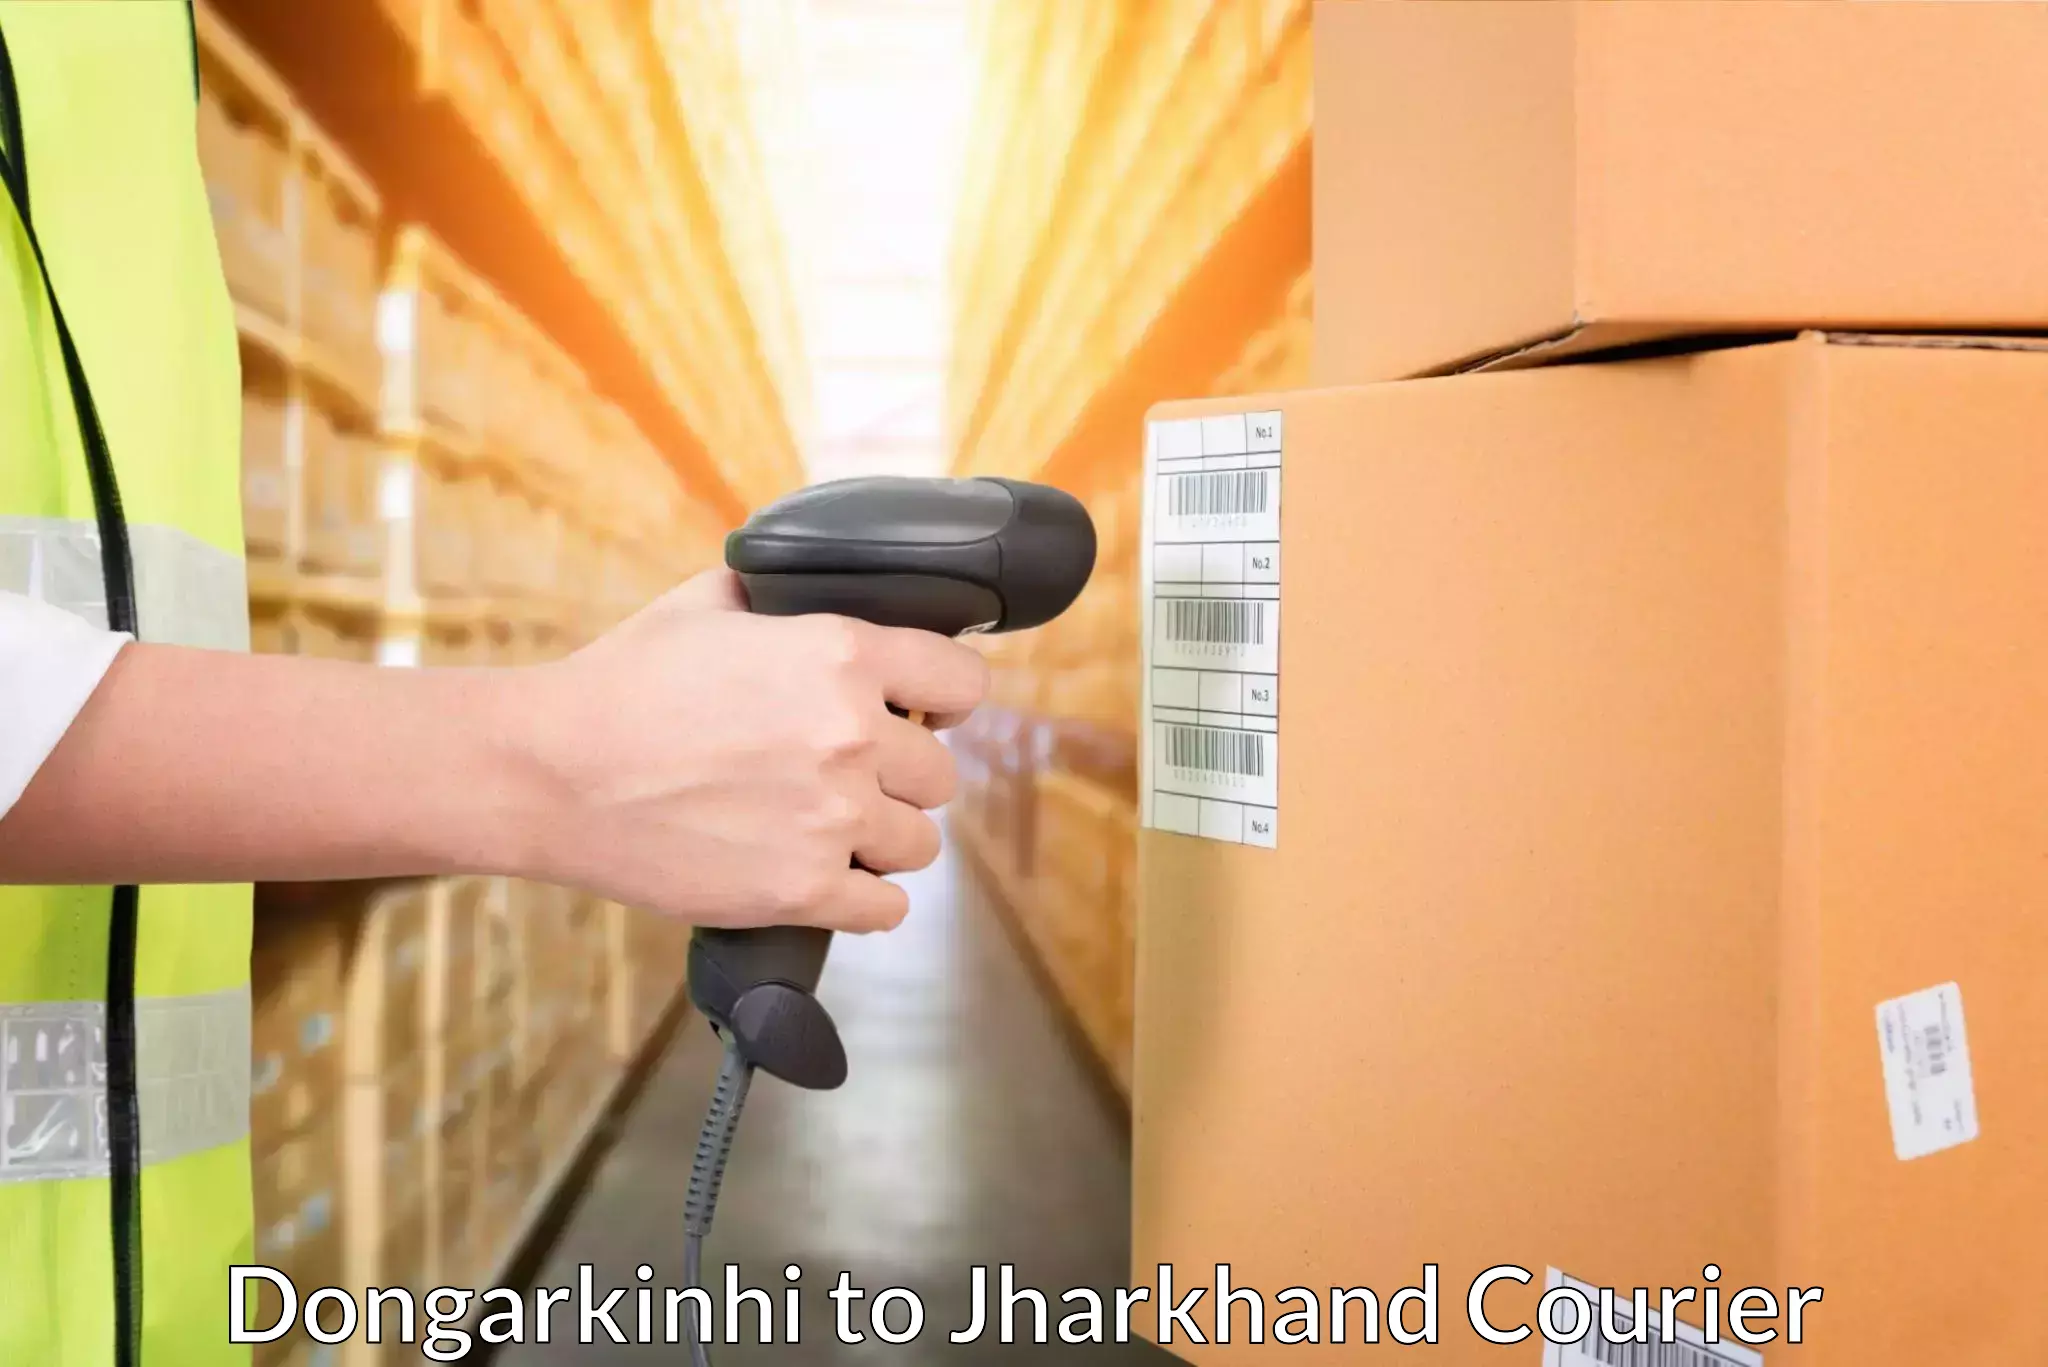 Professional courier handling Dongarkinhi to Jharkhand